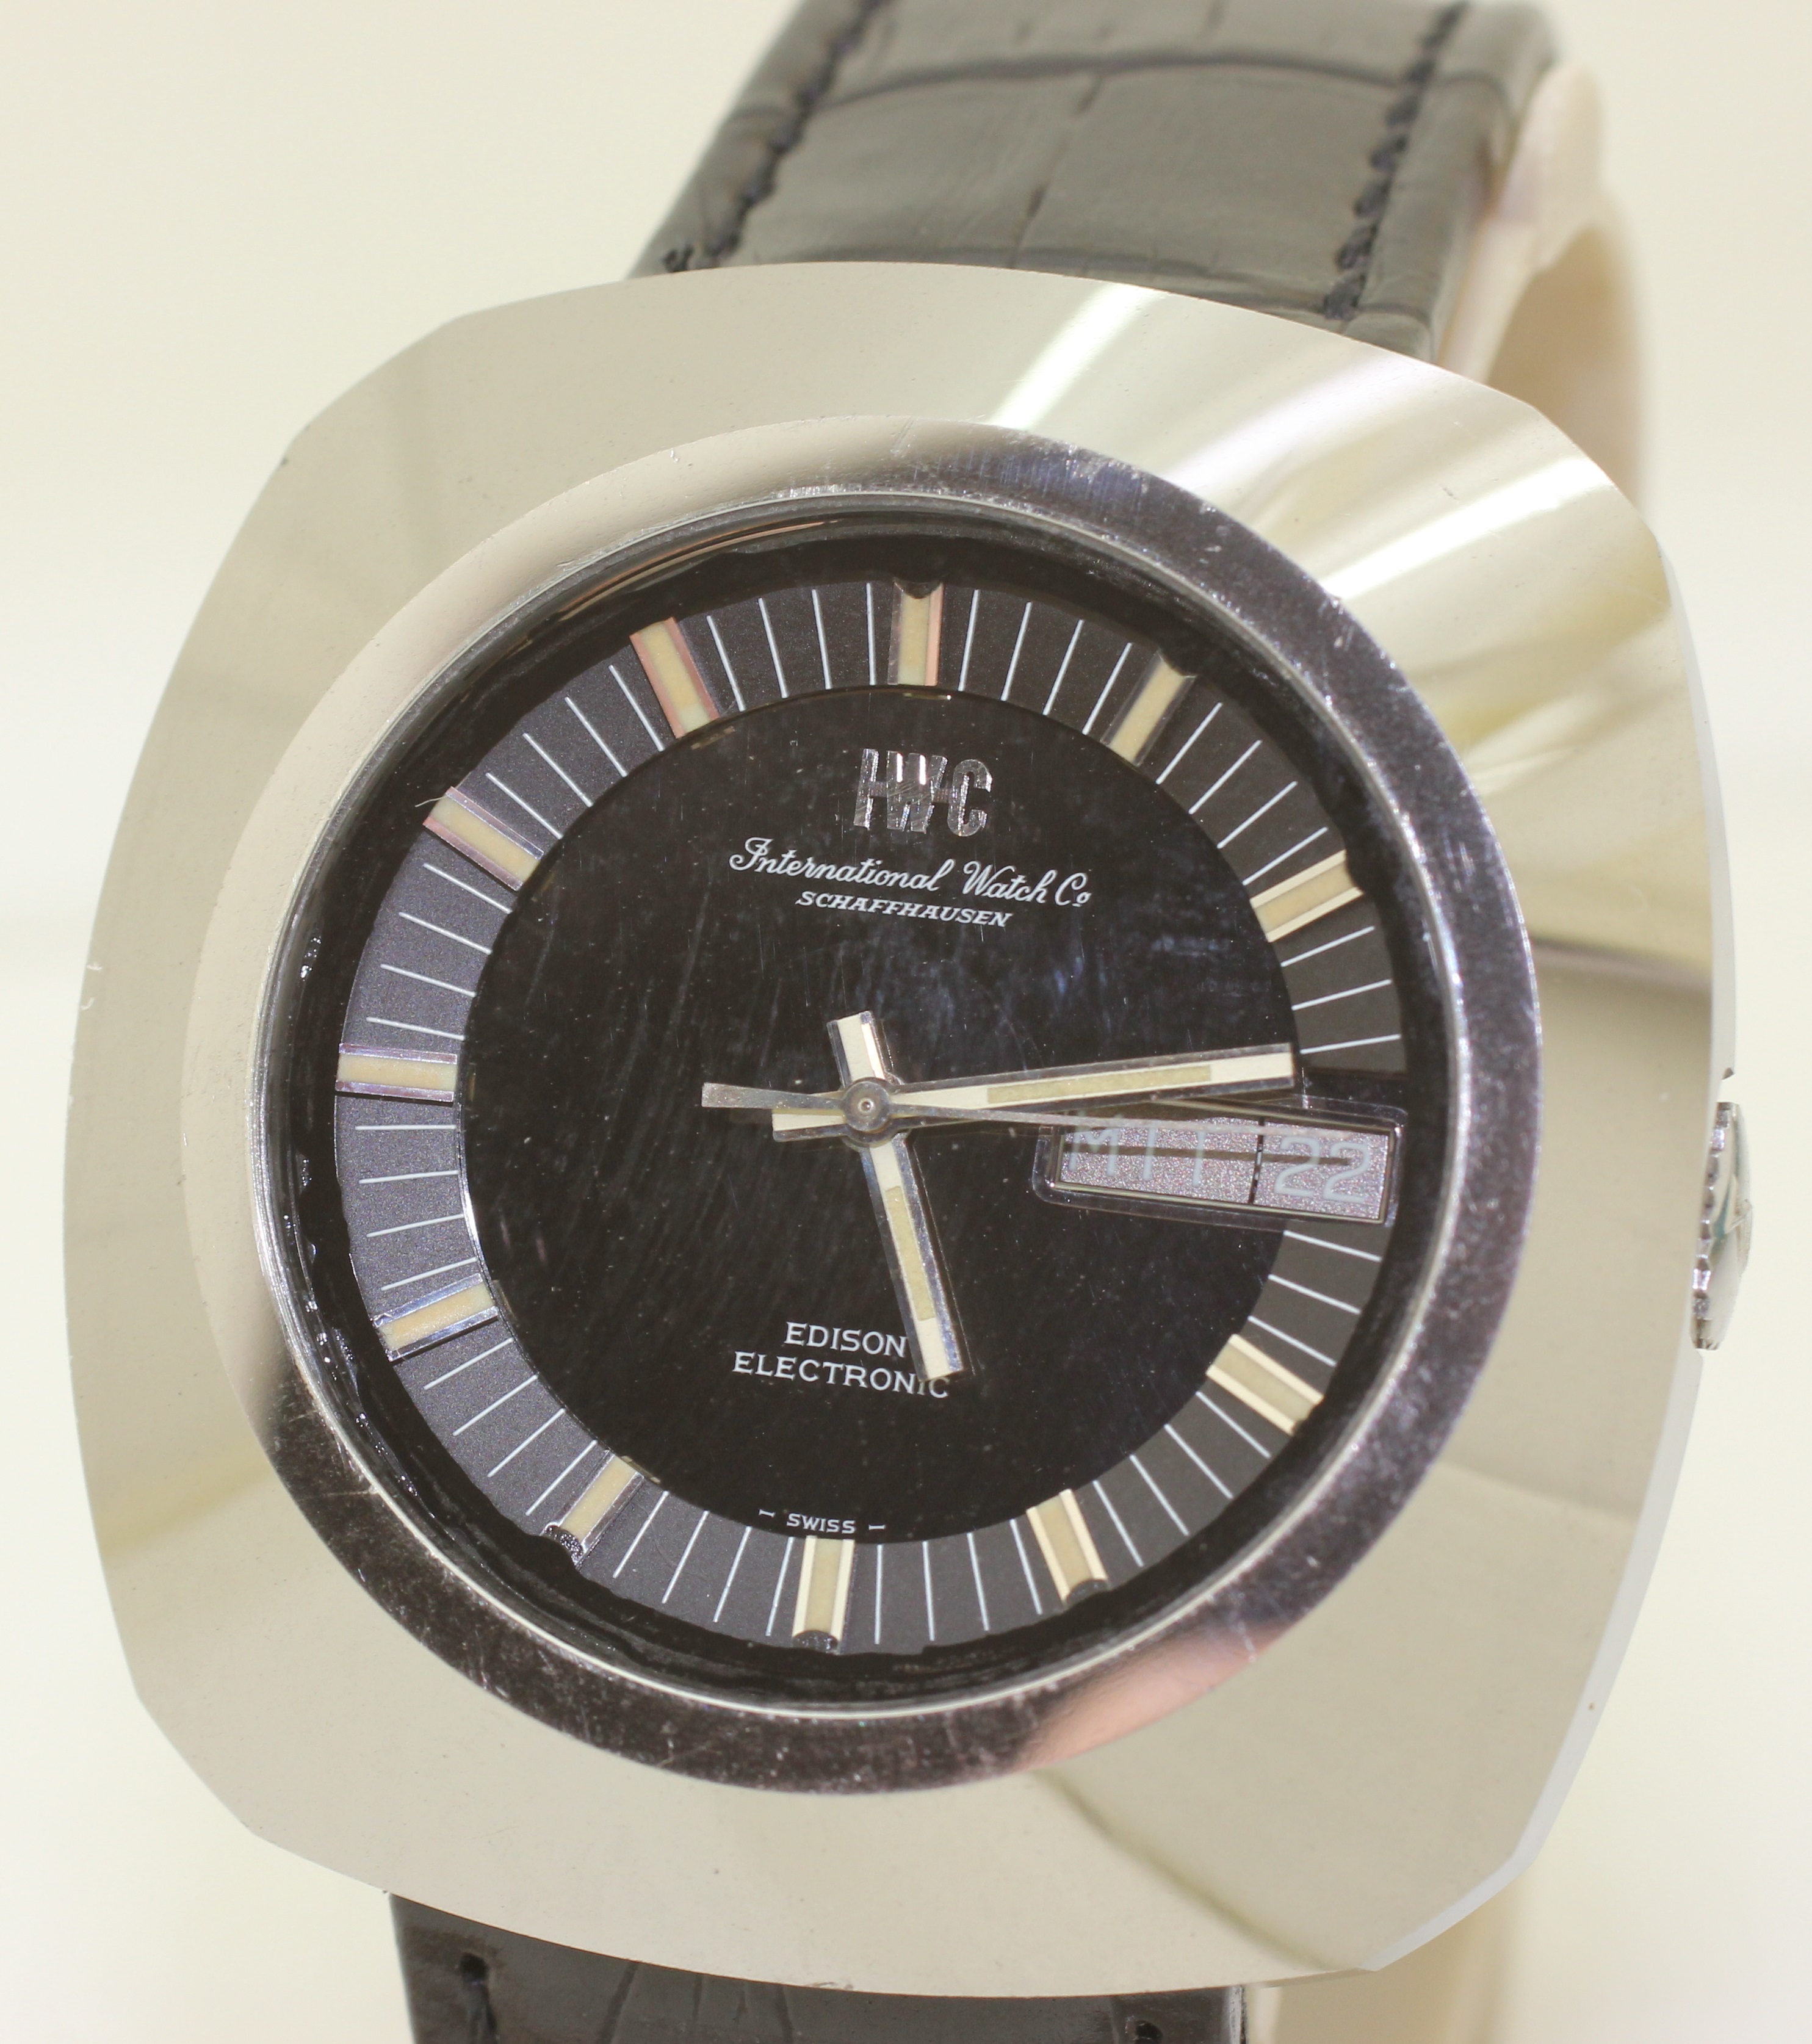 RARE 1970's Stainless Steel IWC Edison Electronic Cal. 160